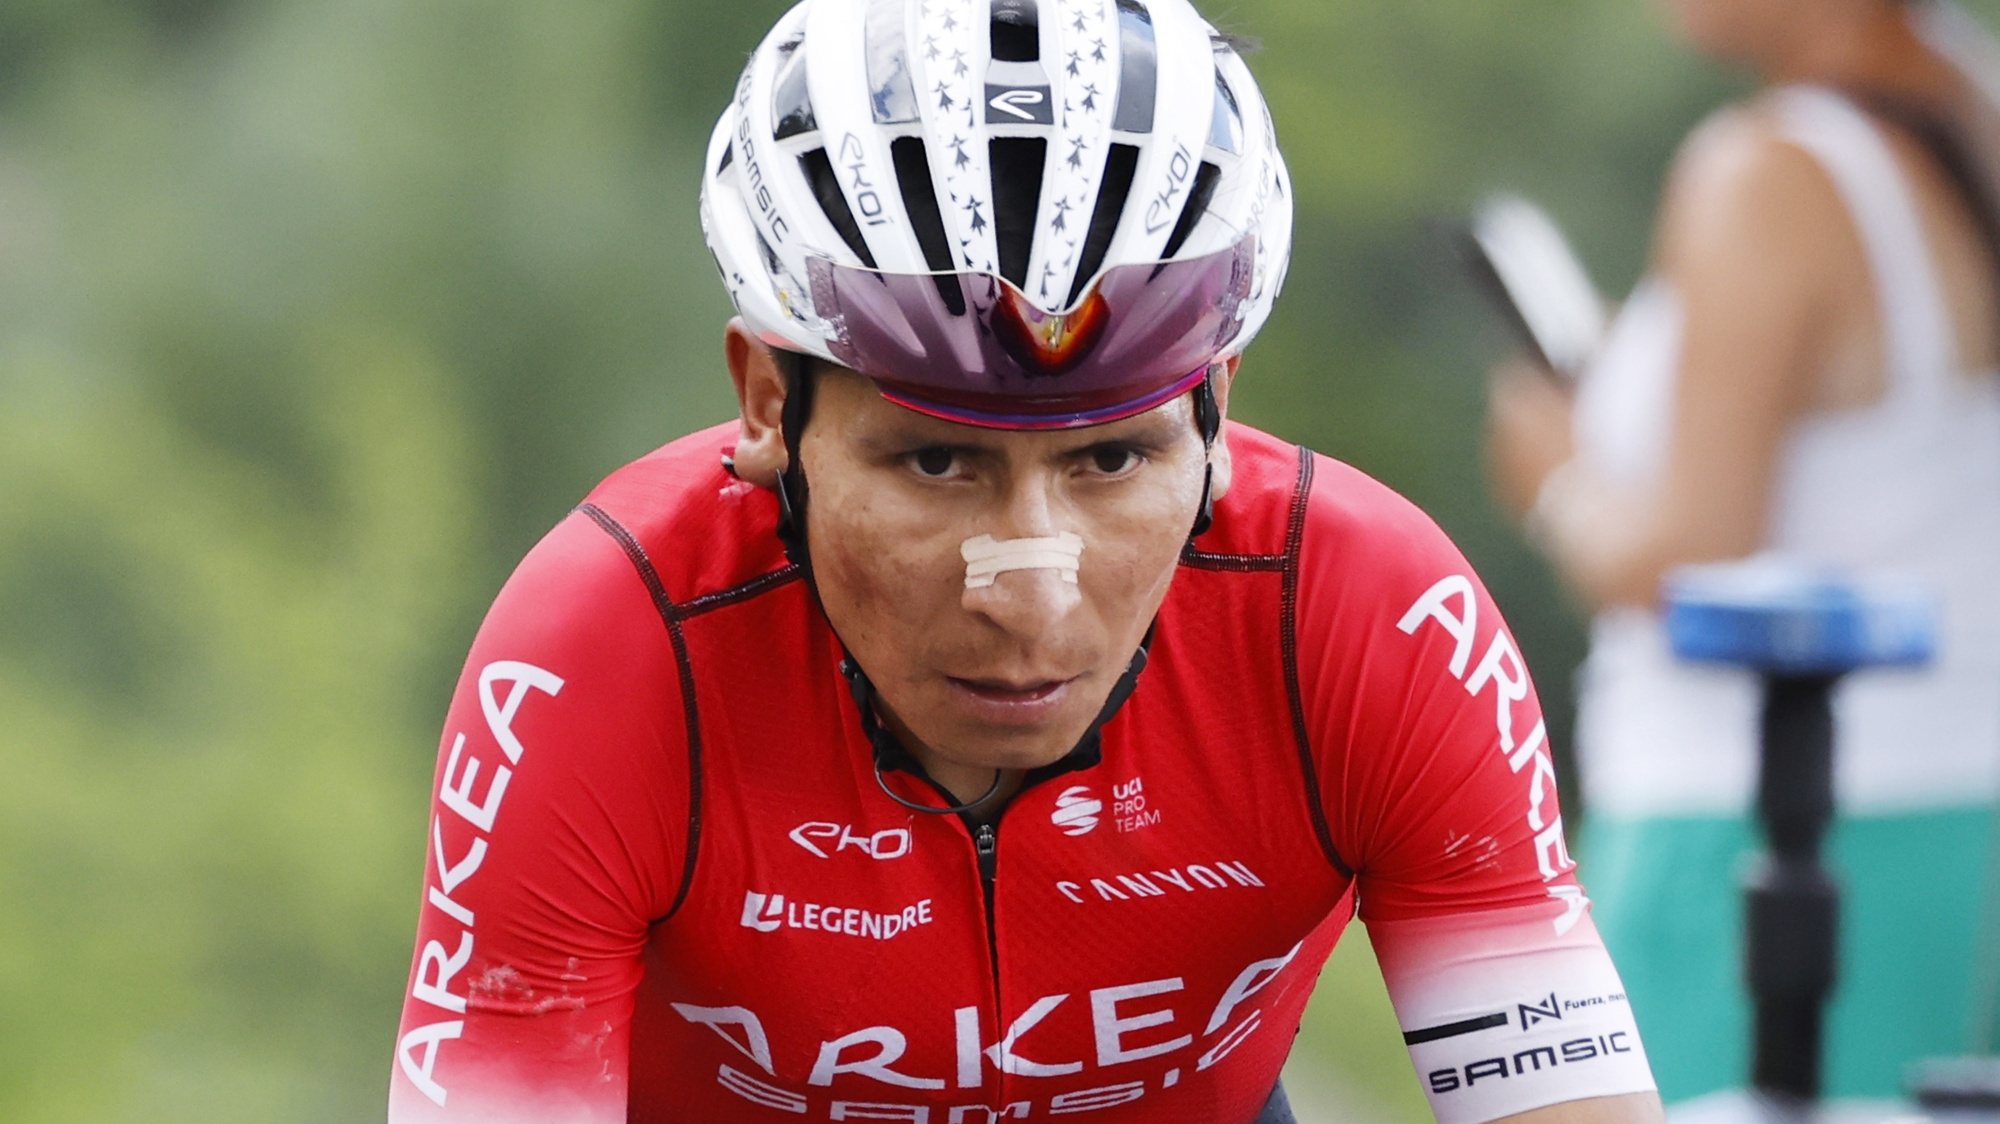 epa10069060 Colombian rider Nairo Quintana of Team Arkea Samsic in action during the 11th stage of the Tour de France 2022 over 151.7km from Albertville to the Col du Granon Serre Chevalier in the commune of Saint-Chaffrey, France, 13 July 2022.  EPA/YOAN VALAT